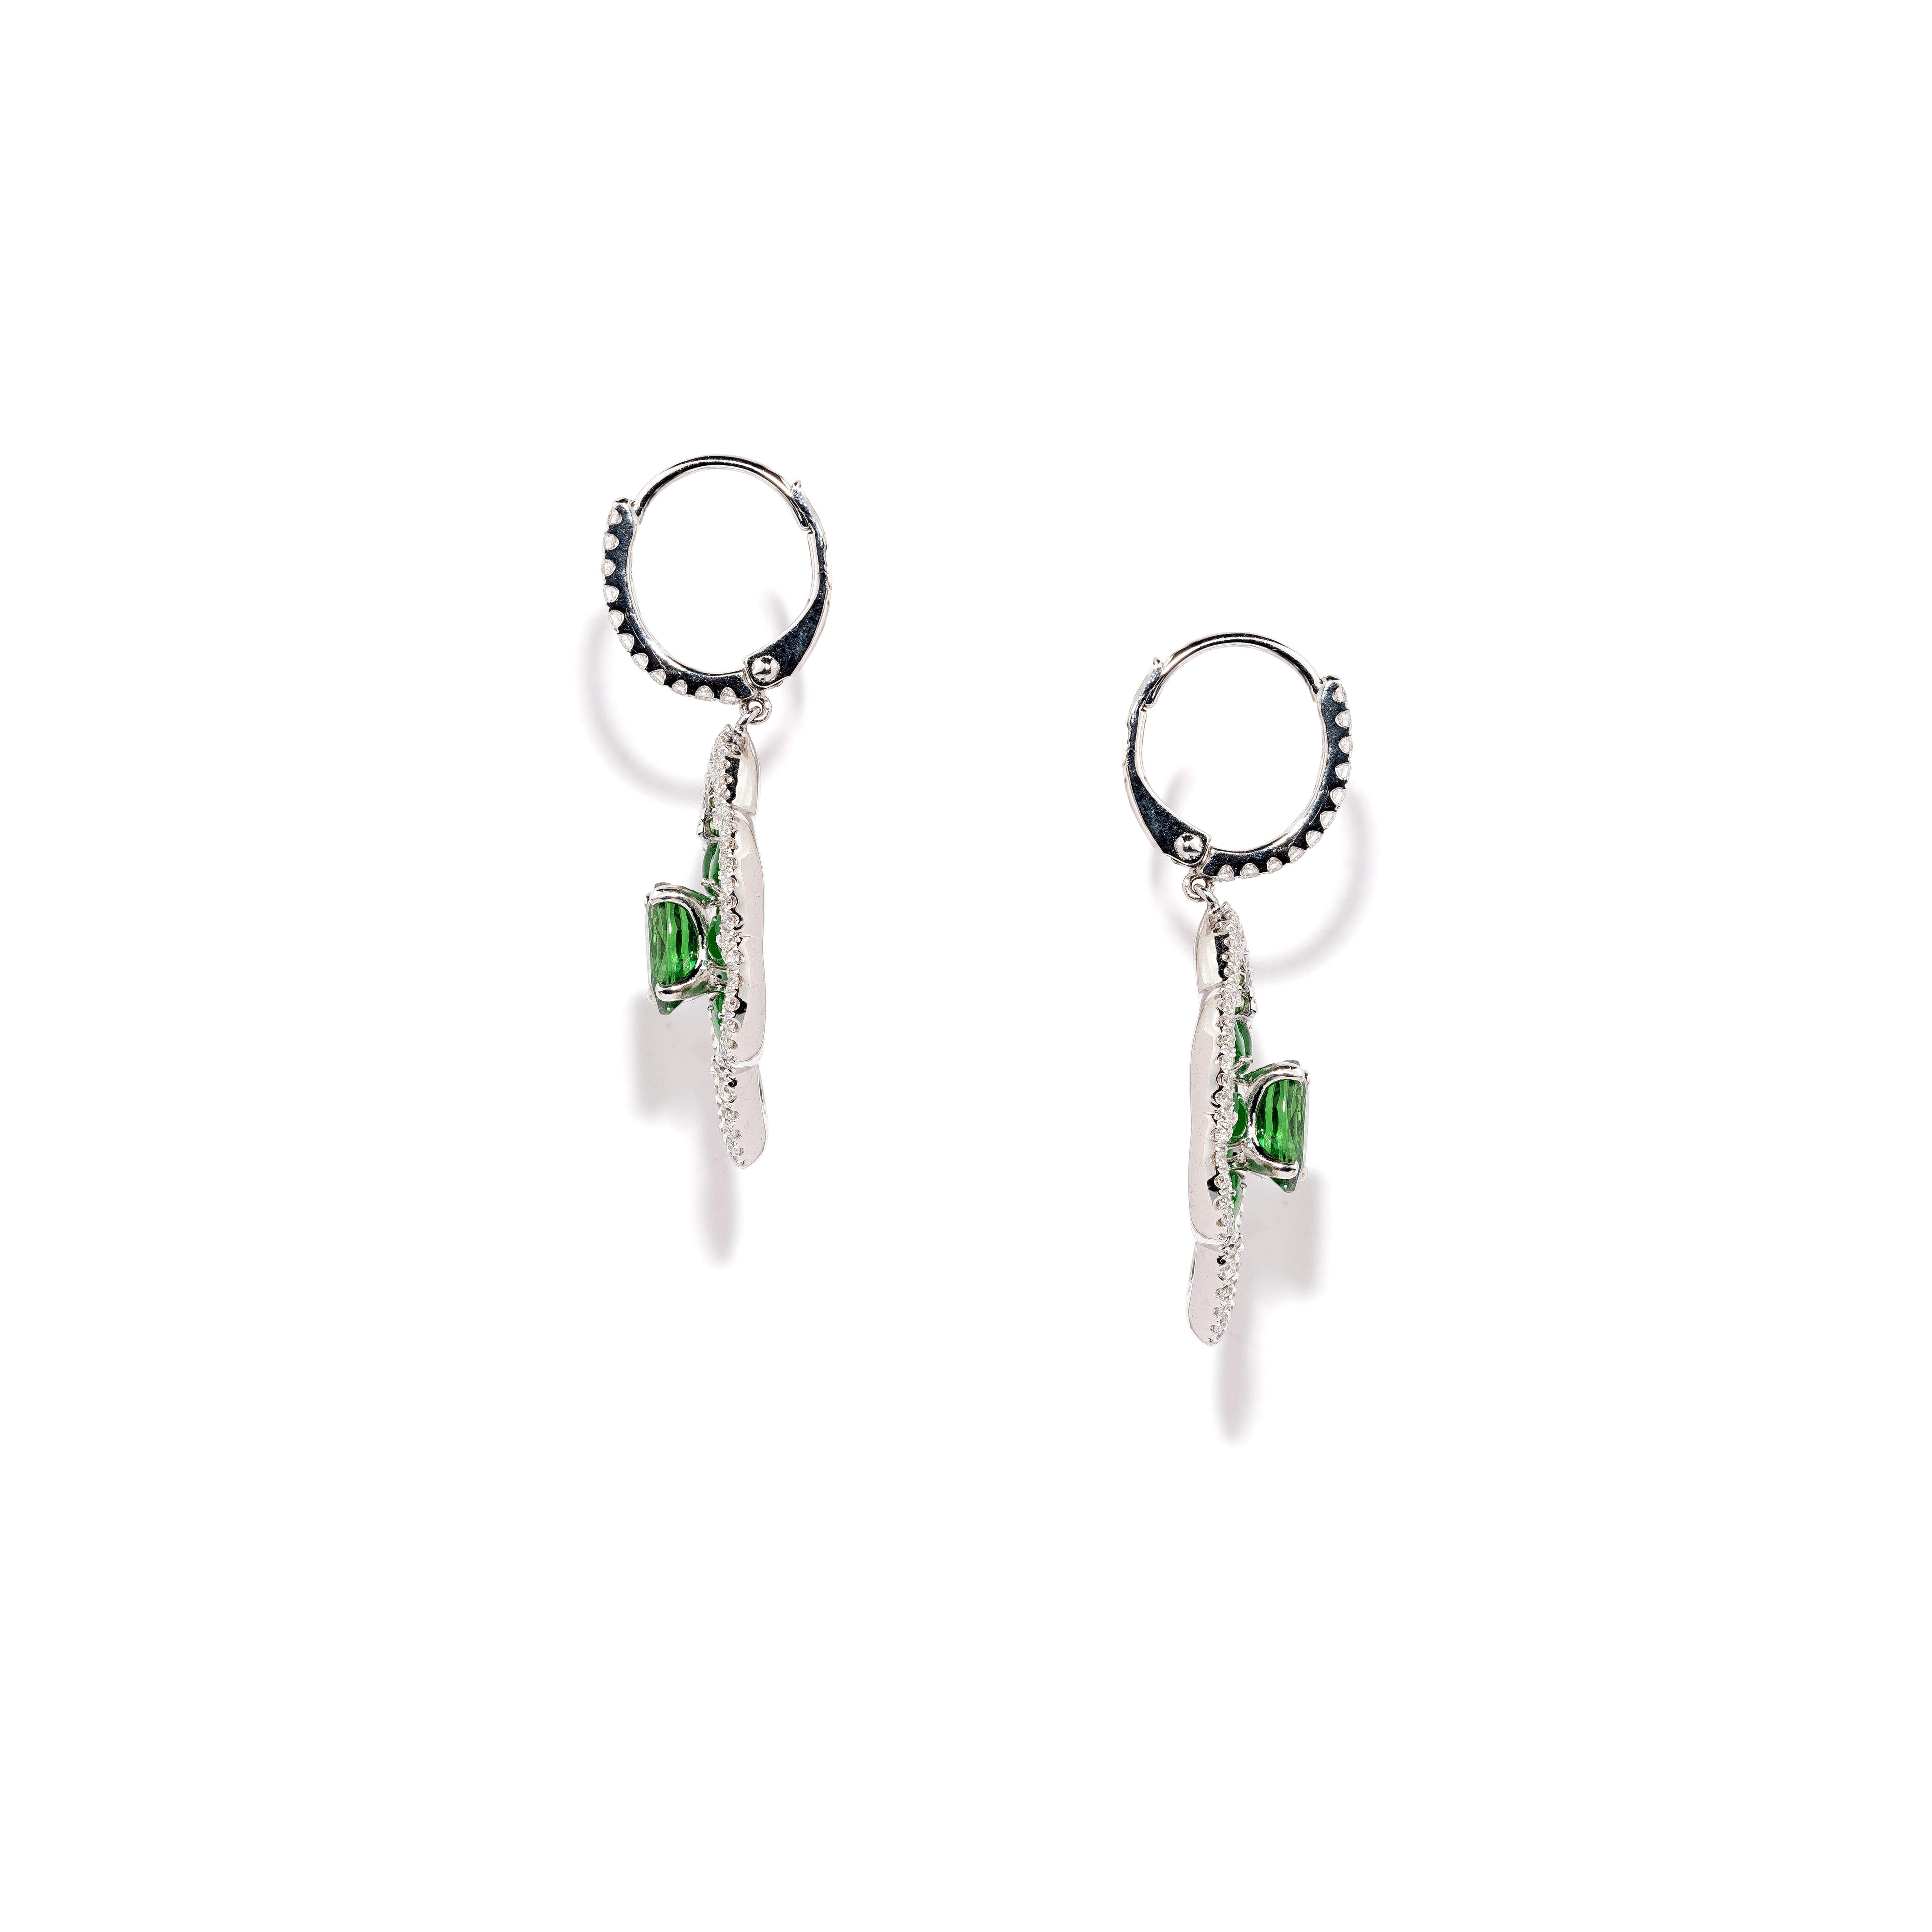 One pair of earrings made in white gold and set with:
2 Oval Shape Tsavorites weighing 2.21 cts
32 Tsavorites weighing 0.22 cts
12 Pieces of Green Jade weighing 1.59 cts
130 Brilliant Cut Diamonds weighing 0.56 cts
Gold weight: 7.06 cts
Total weight